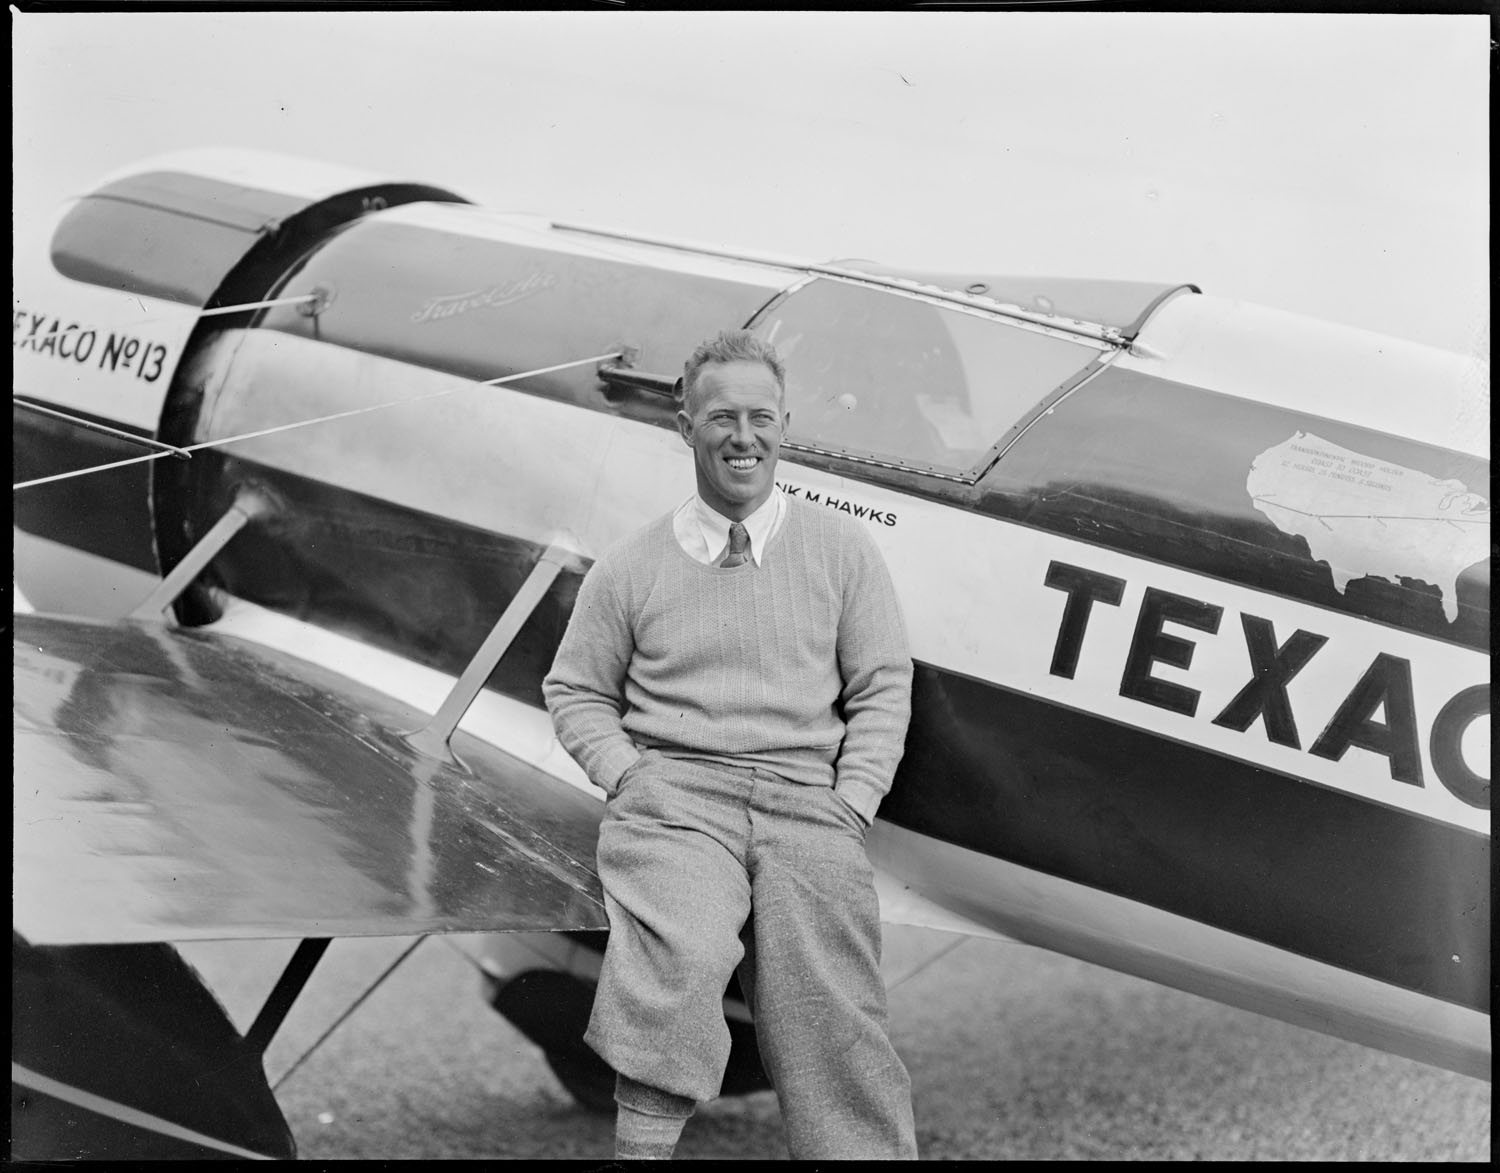 Frank Monroe Hawks with the Texaco 13 Travel-Air Mystery Ship at East Boston Airport, 1930. (Courtesy of the Boston Public Library, Leslie Jones Collection)